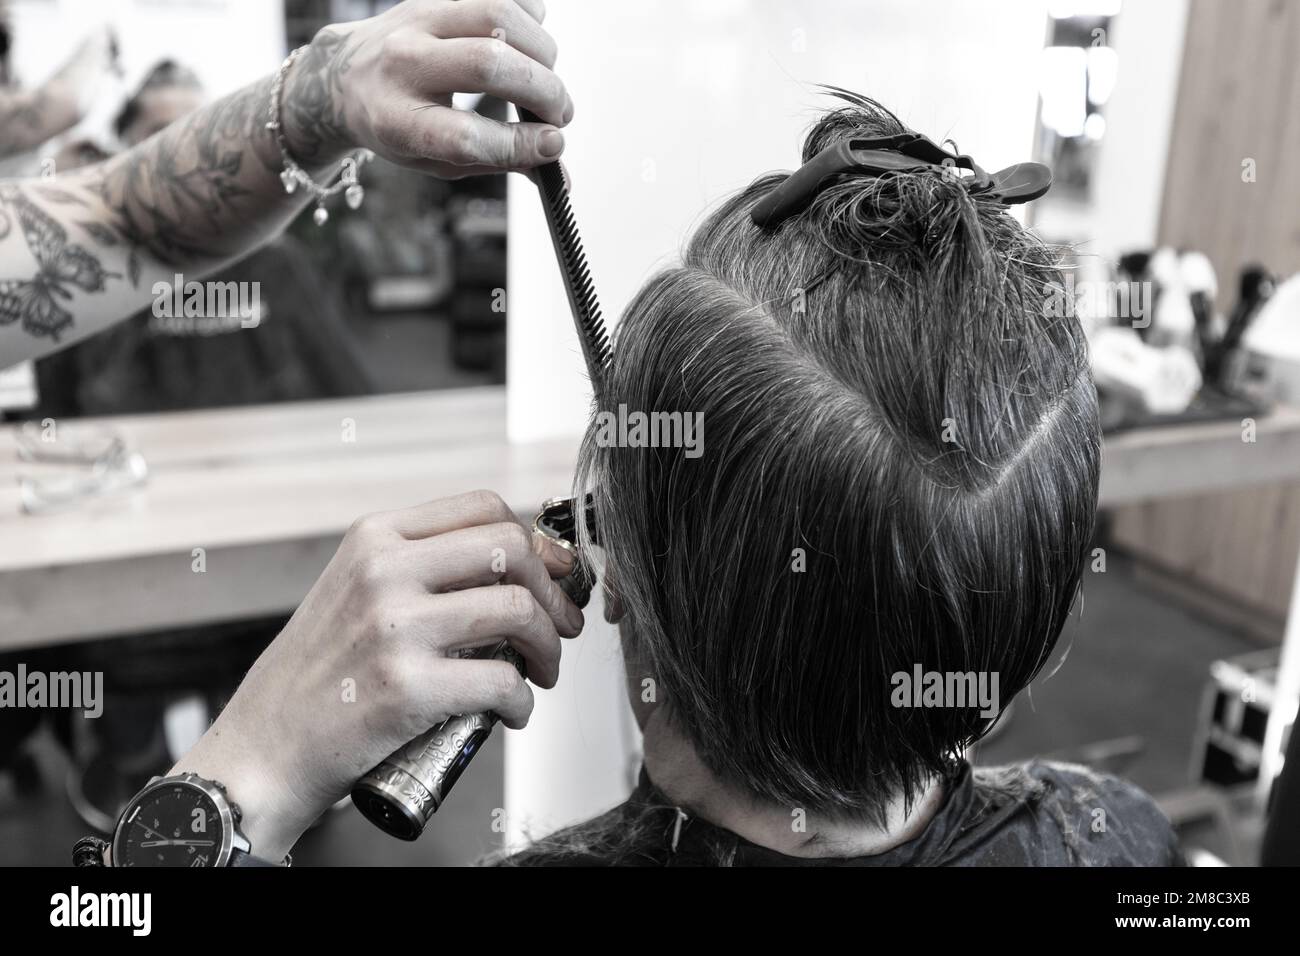 The senior is getting a haircut at the hairdresser's. Black and white photo Stock Photo